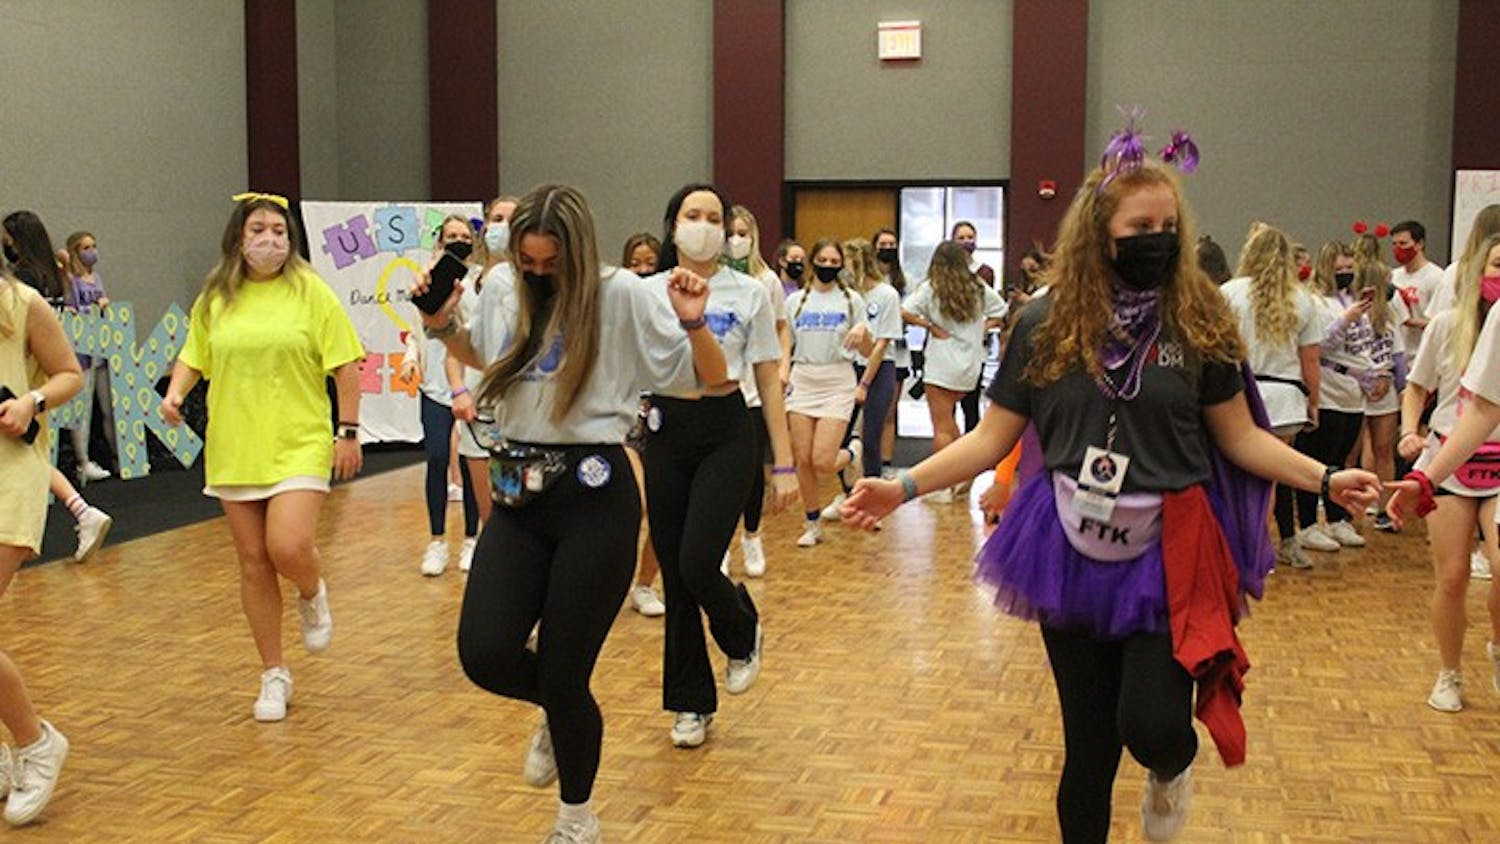 Dance Marathon attendees and volunteers doing the "Cha Cha Slide."